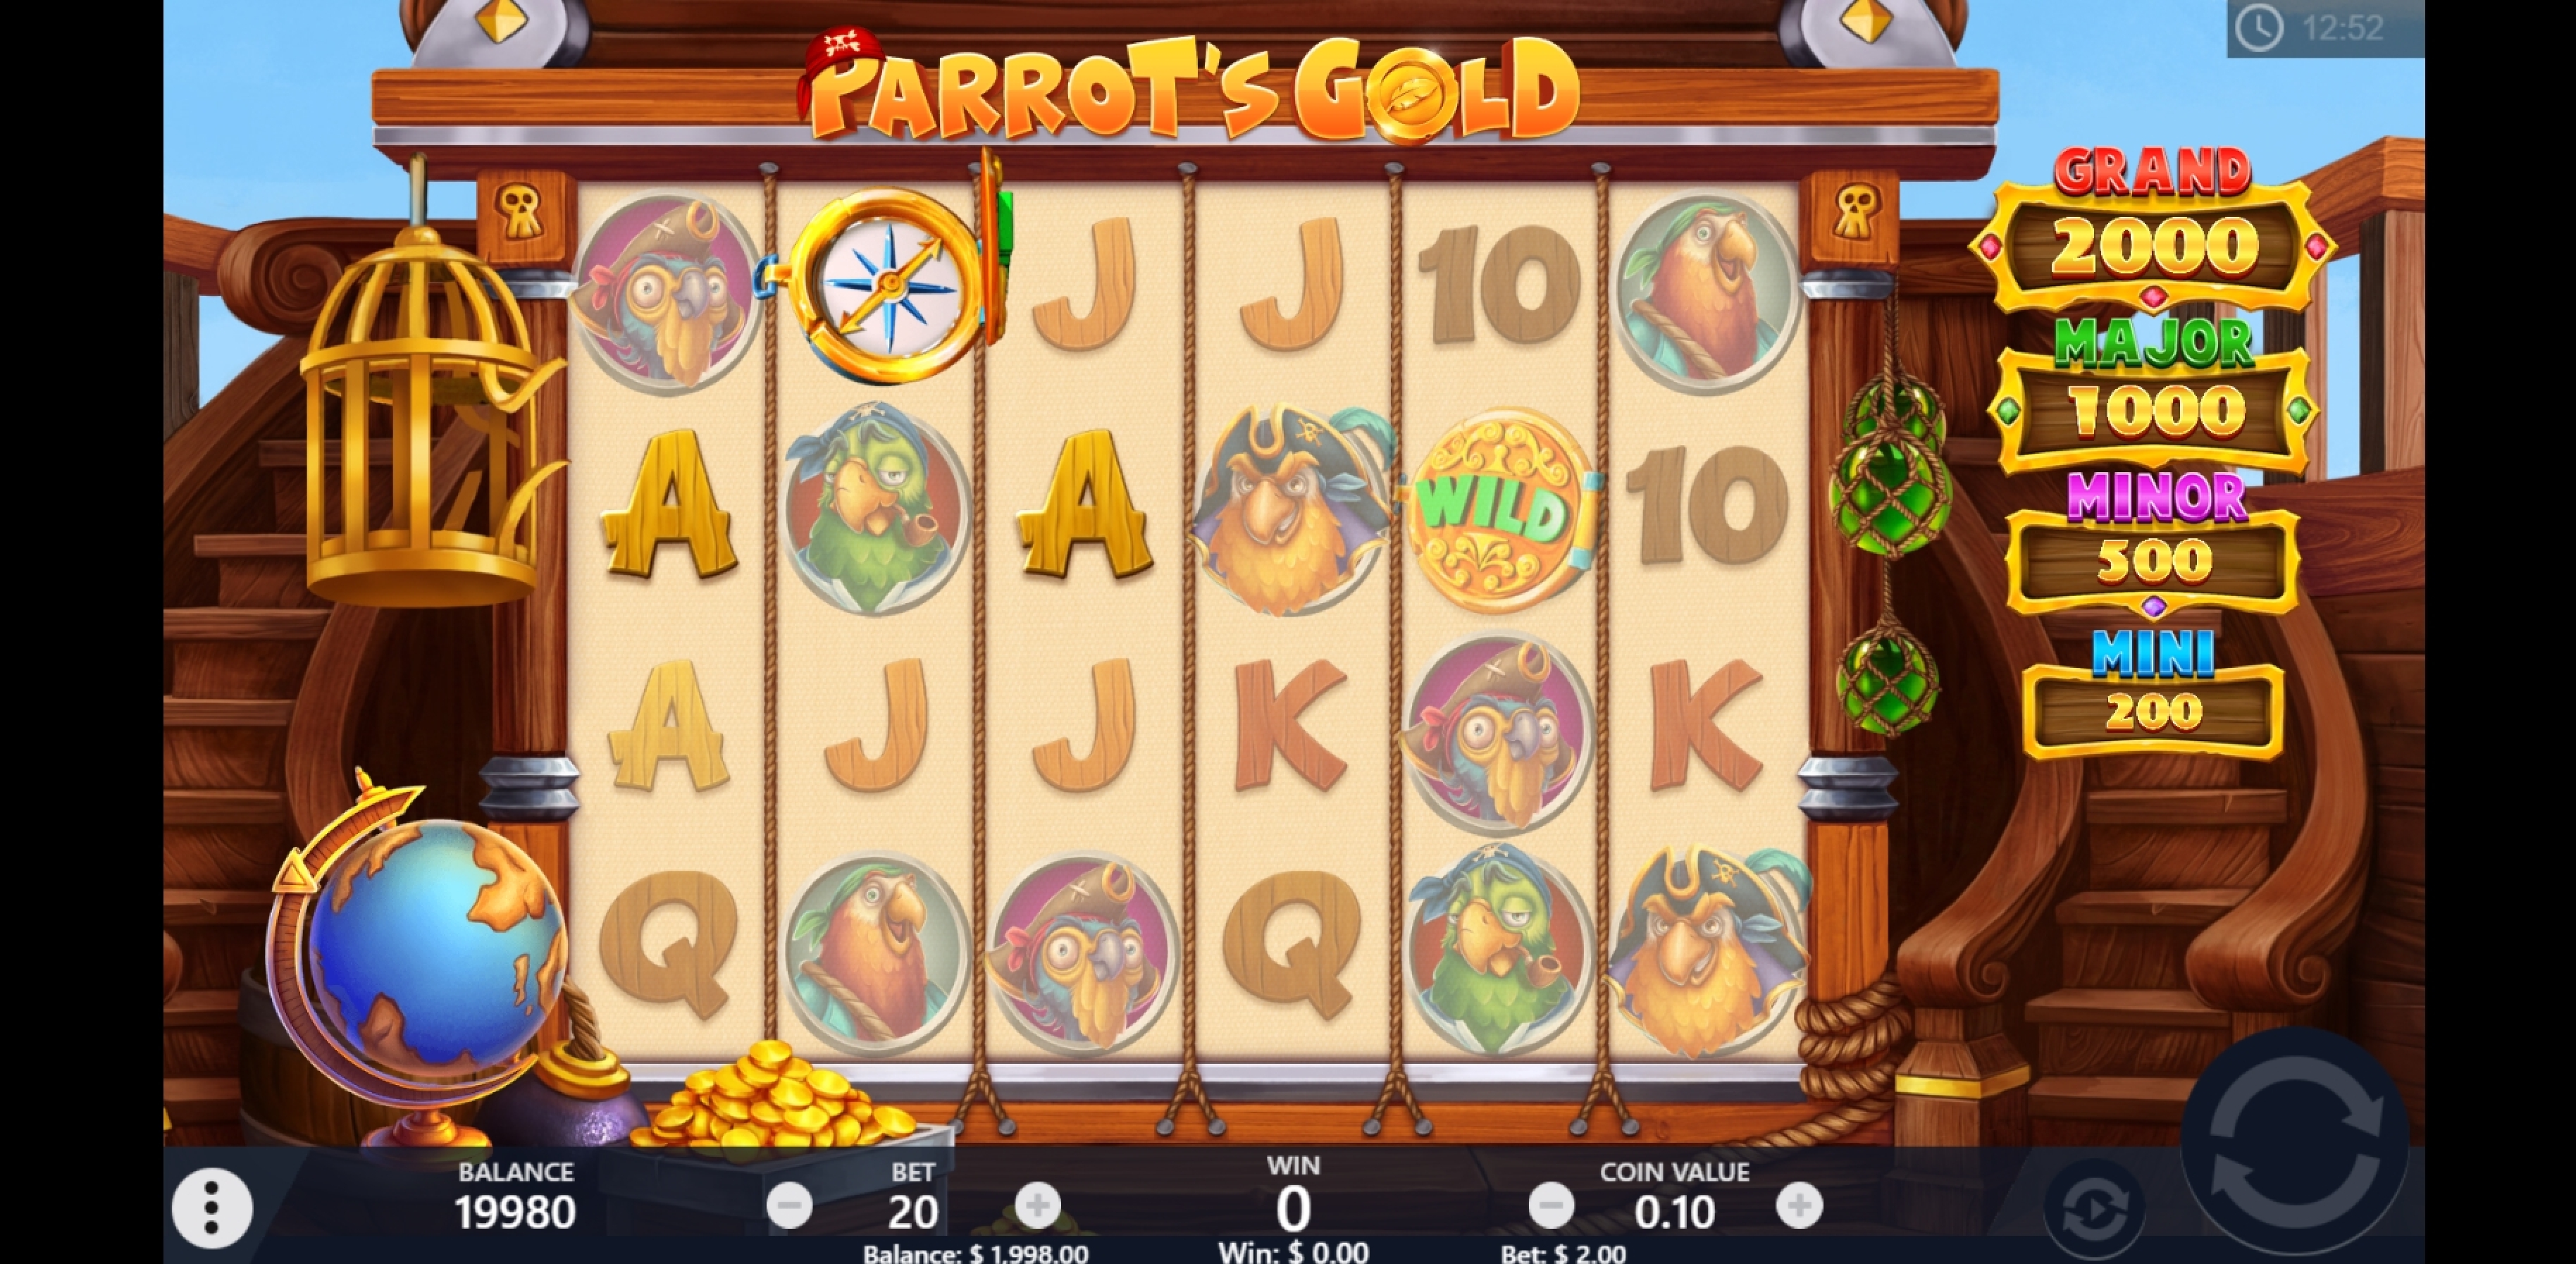 Win Money in Parrot's Gold Free Slot Game by PariPlay